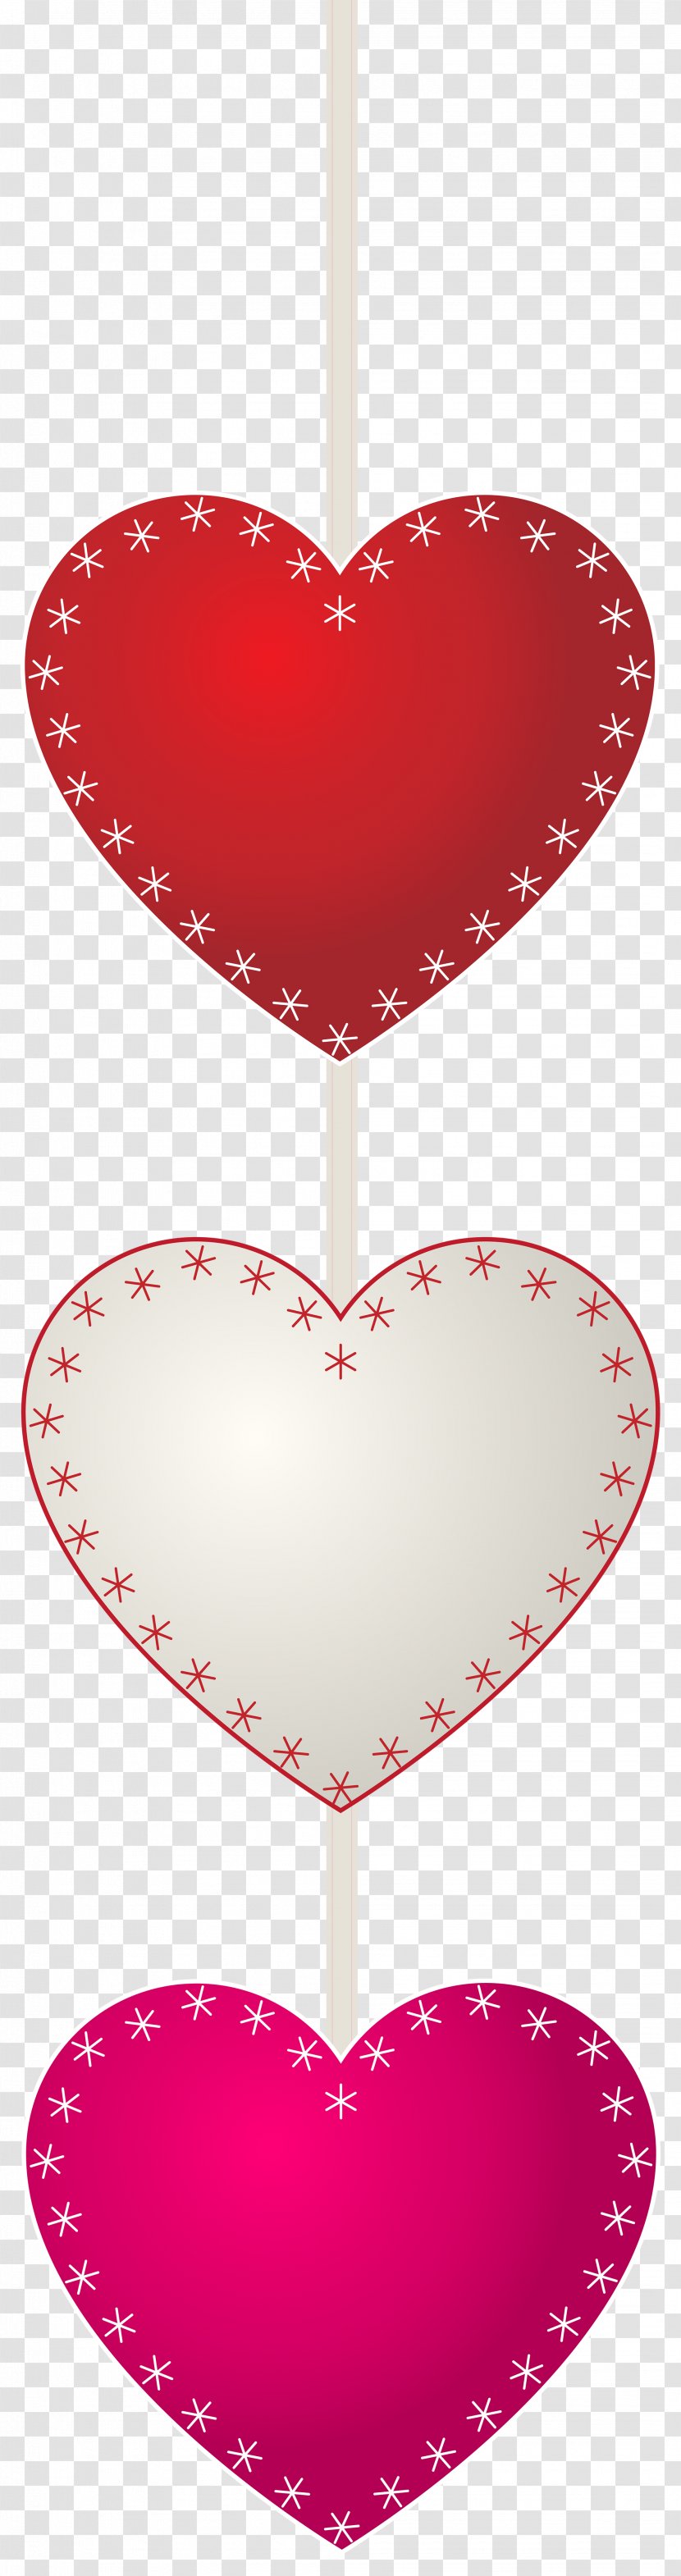 Heart Red カラー文字 Graphic Design - Flower - Art Deco Transparent PNG